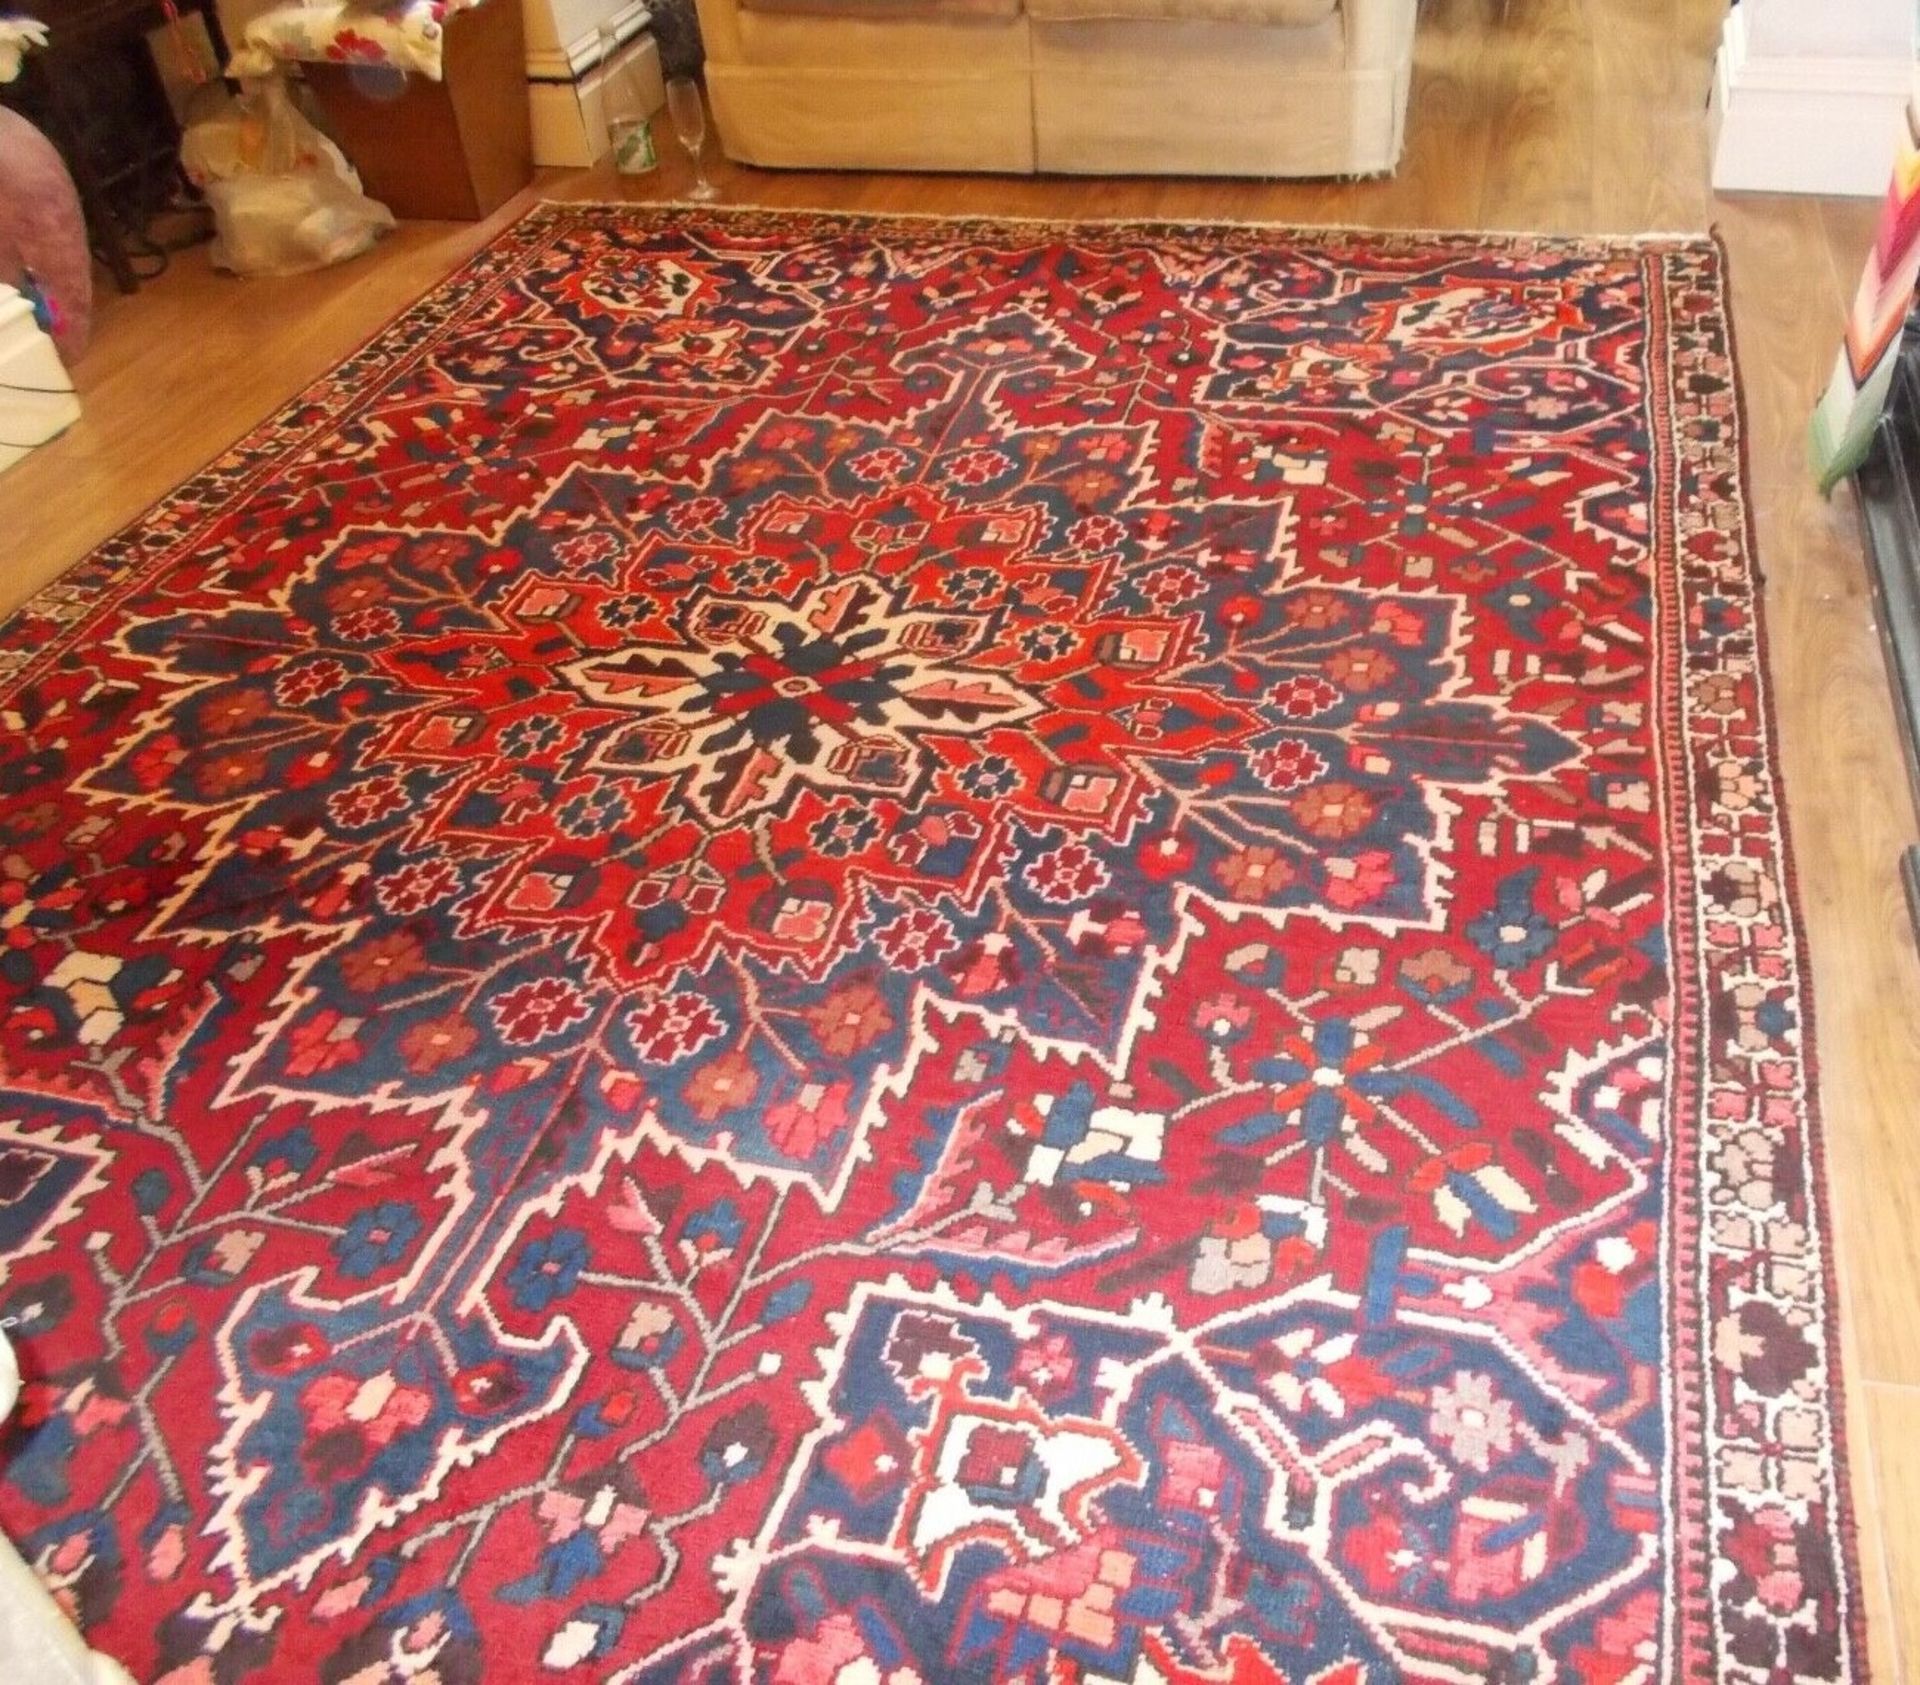 Azerbaijani style  carpet wool pile quality and high artistic value hand made red ground with a